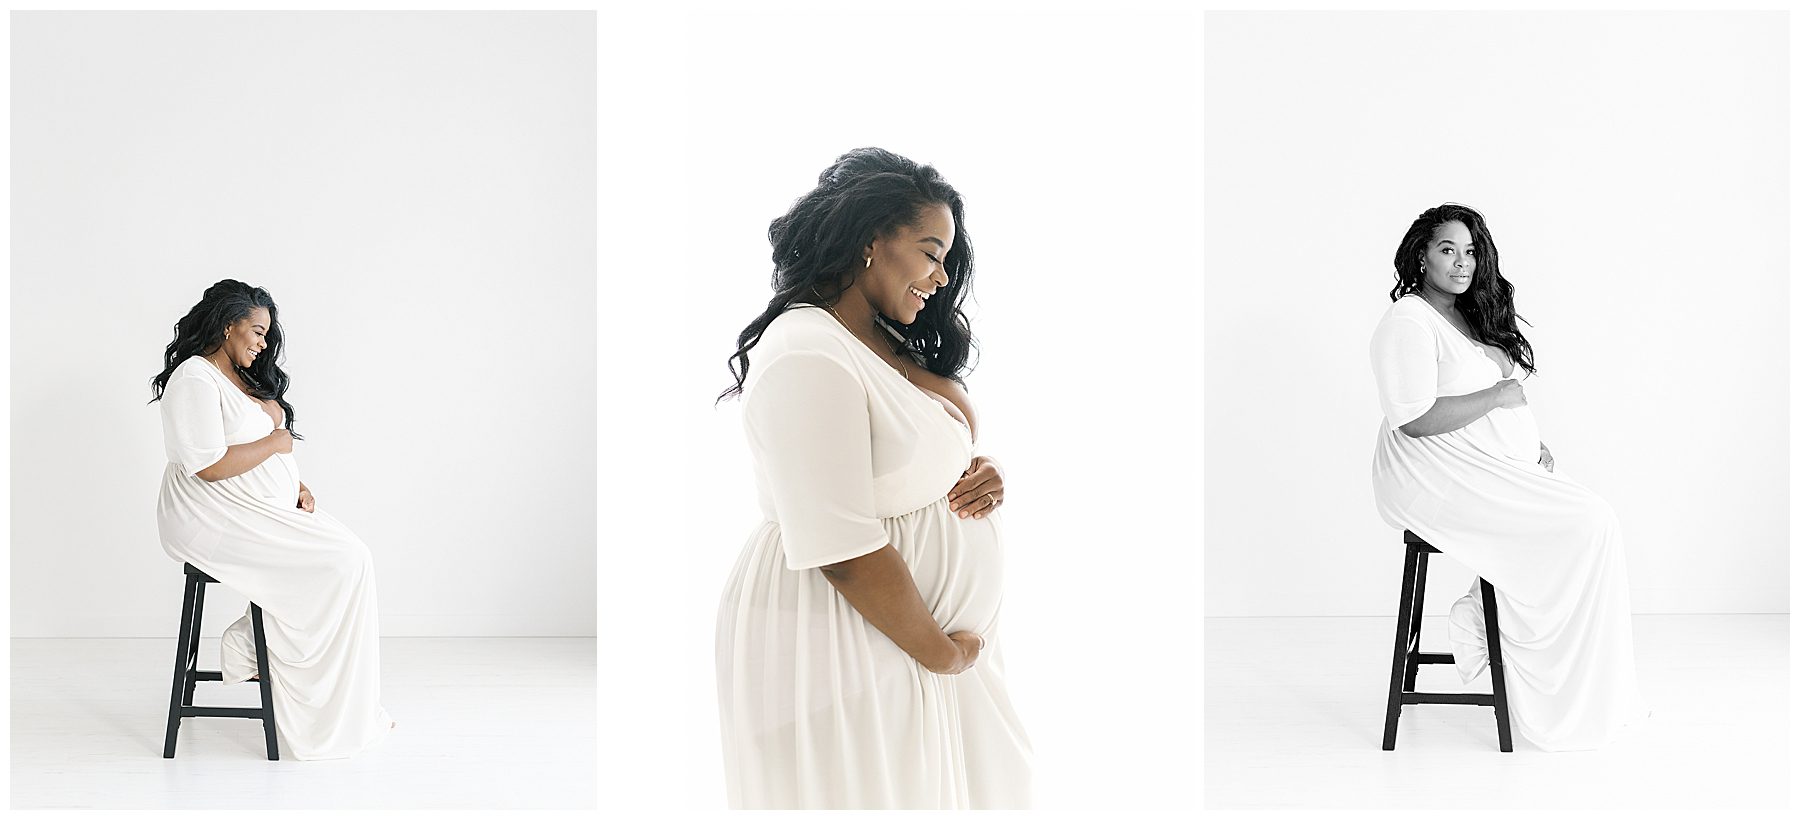 maternity photos of gorgeous black woman wearing white gown against a white backdrop